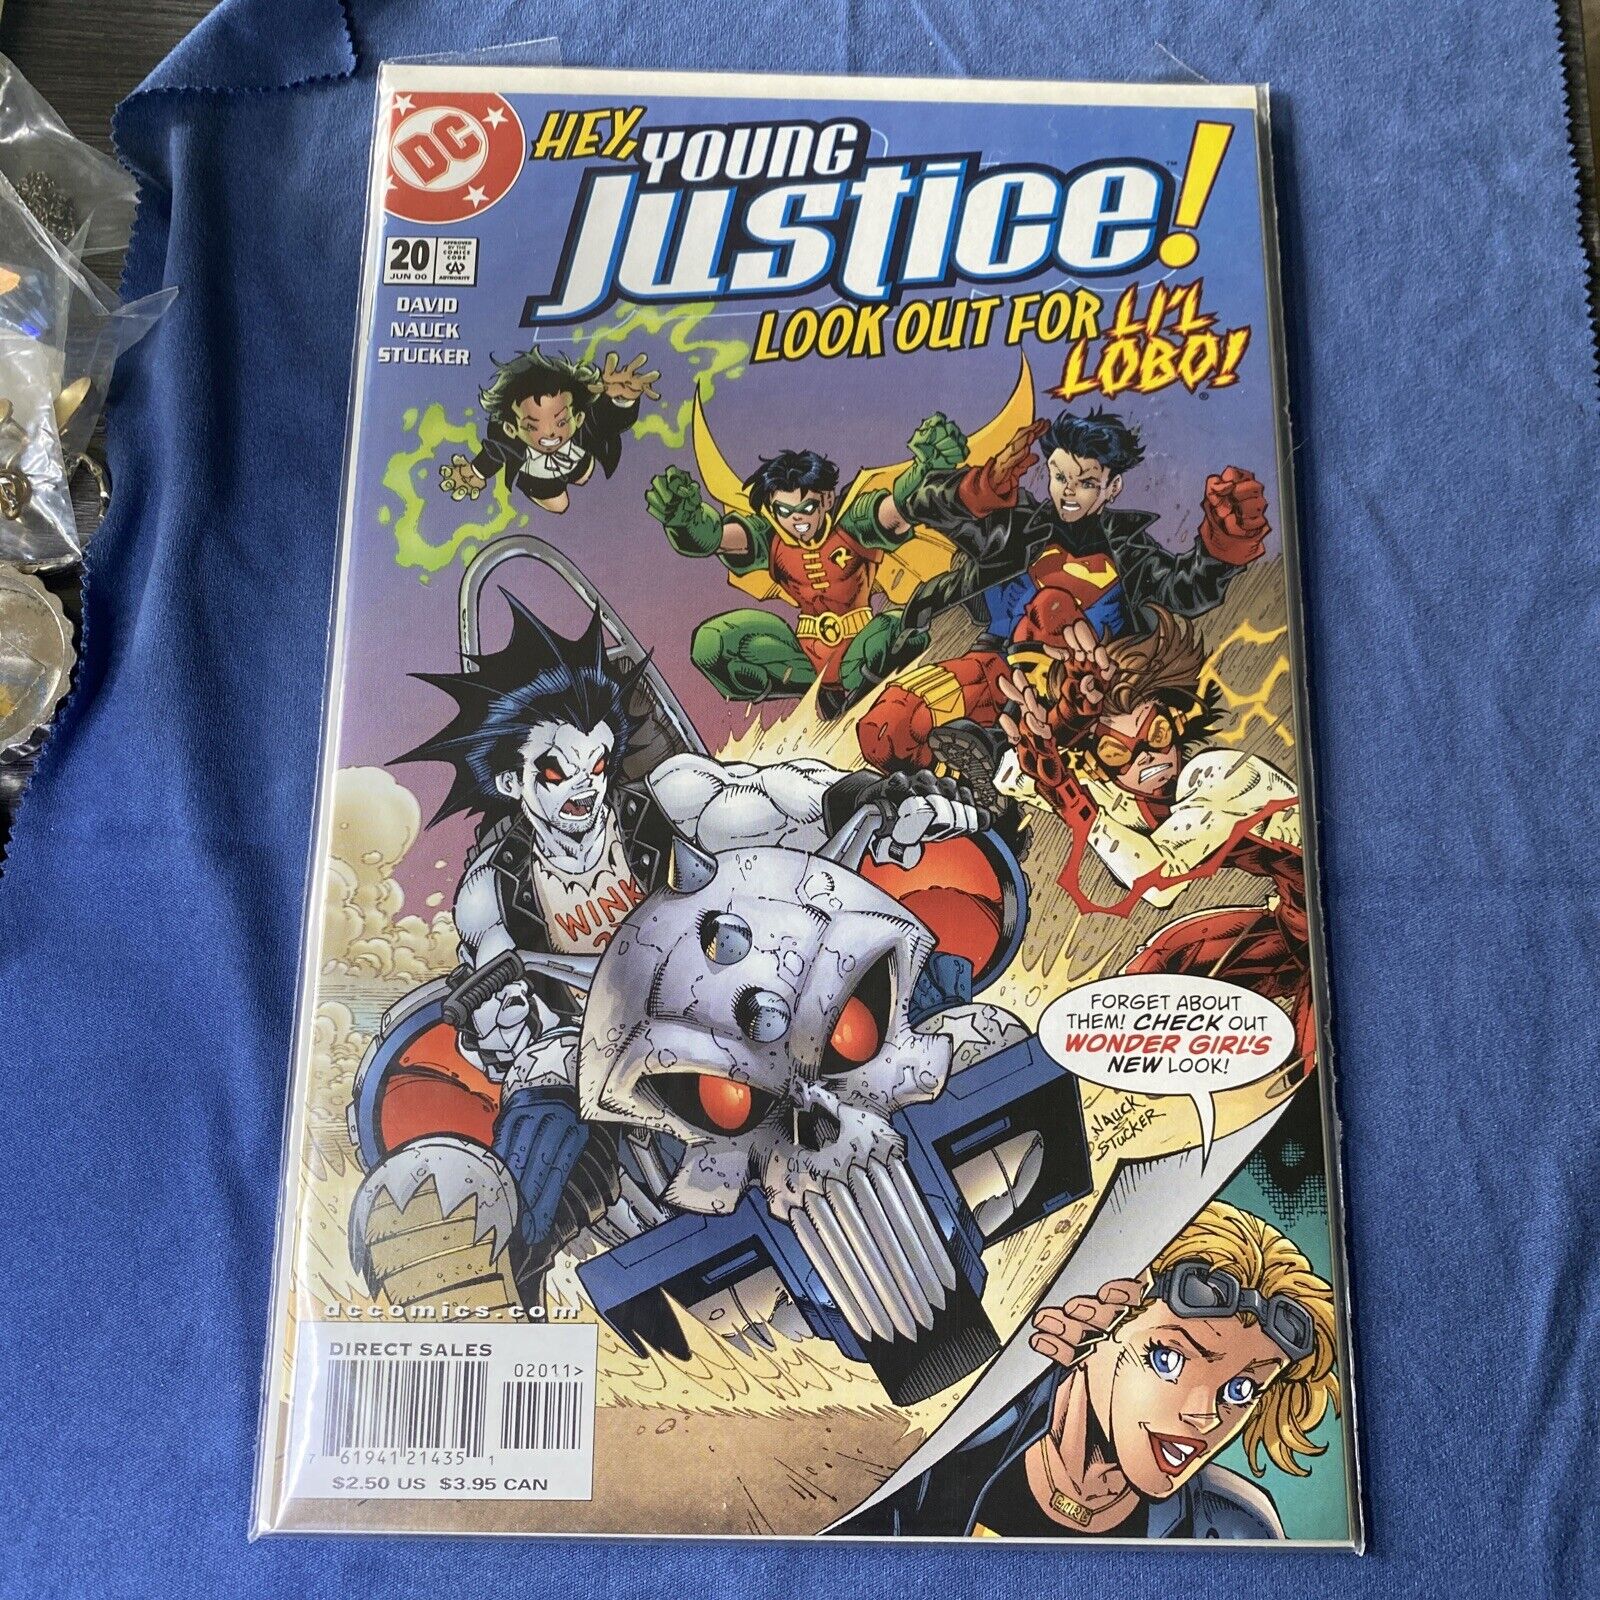 Hey, Young Justice Look Out For Lil Lobo #20 June 2000 WRAPPED